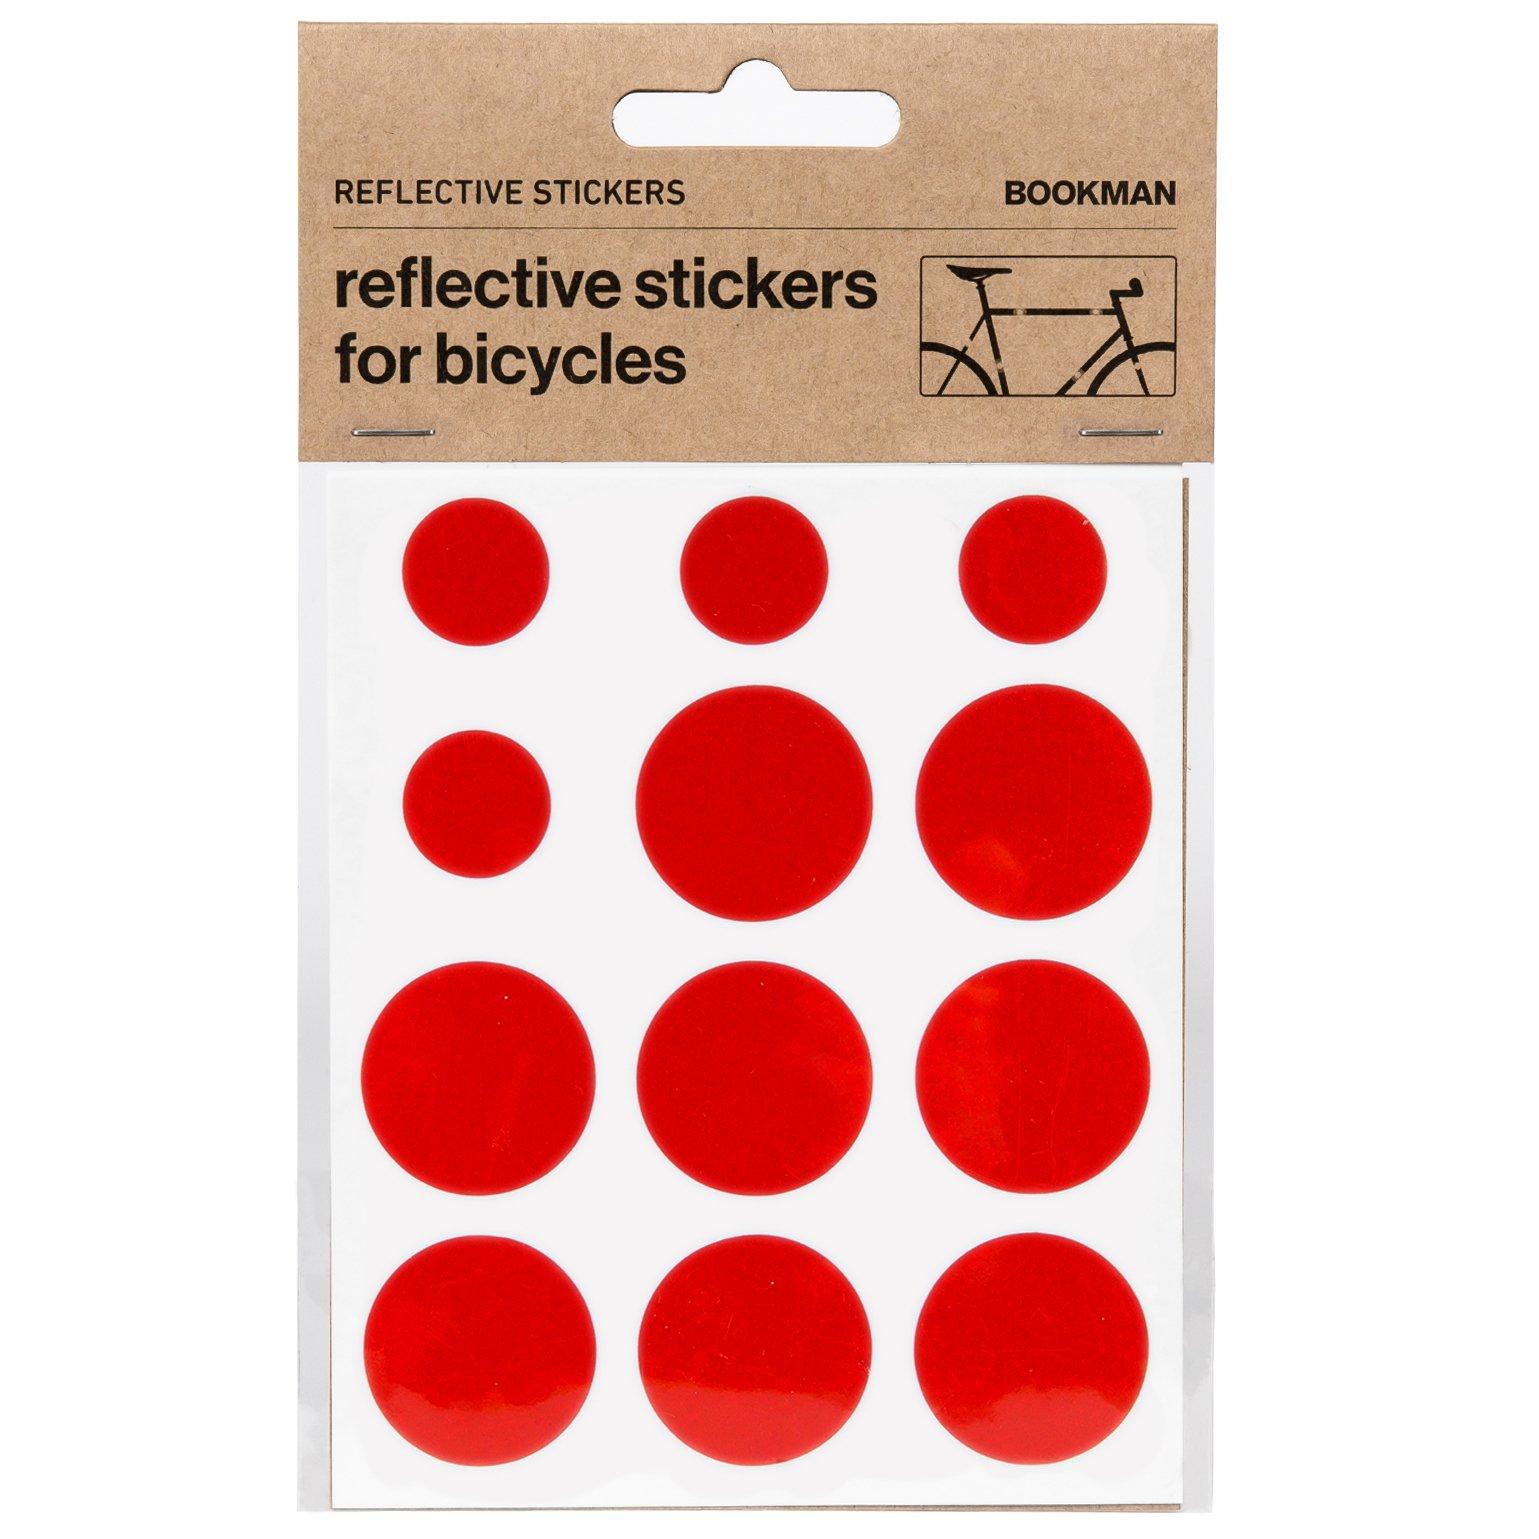 Bookman Reflective Stickers - Red